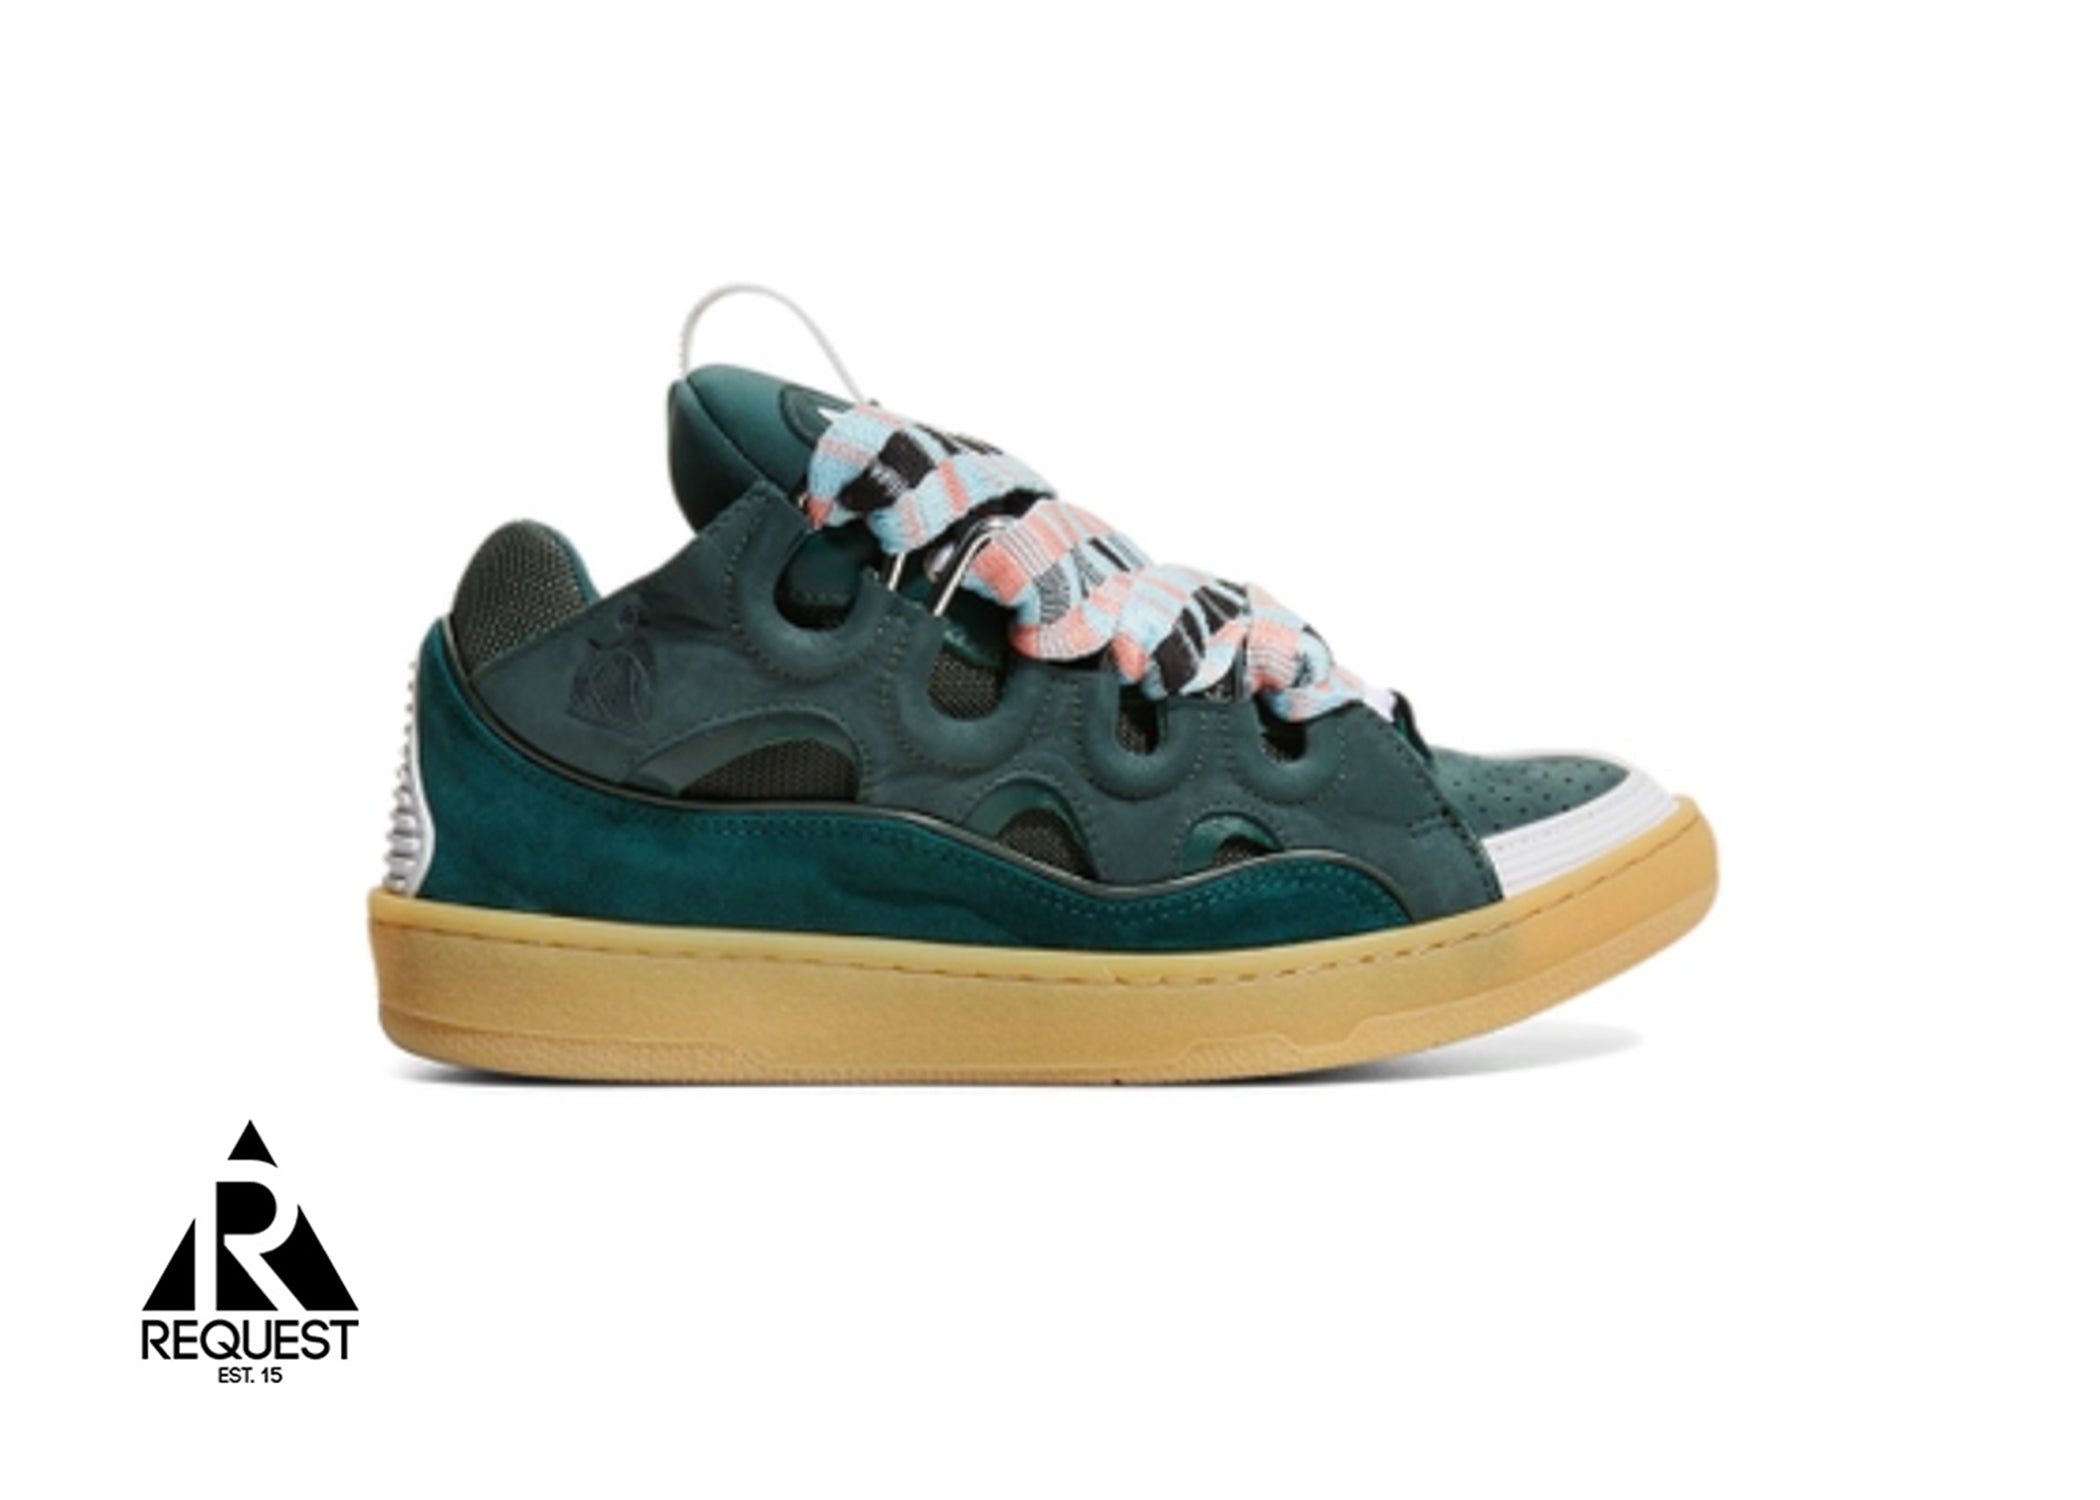 Lanvin Leather Curb Sneaker "Forest Green"